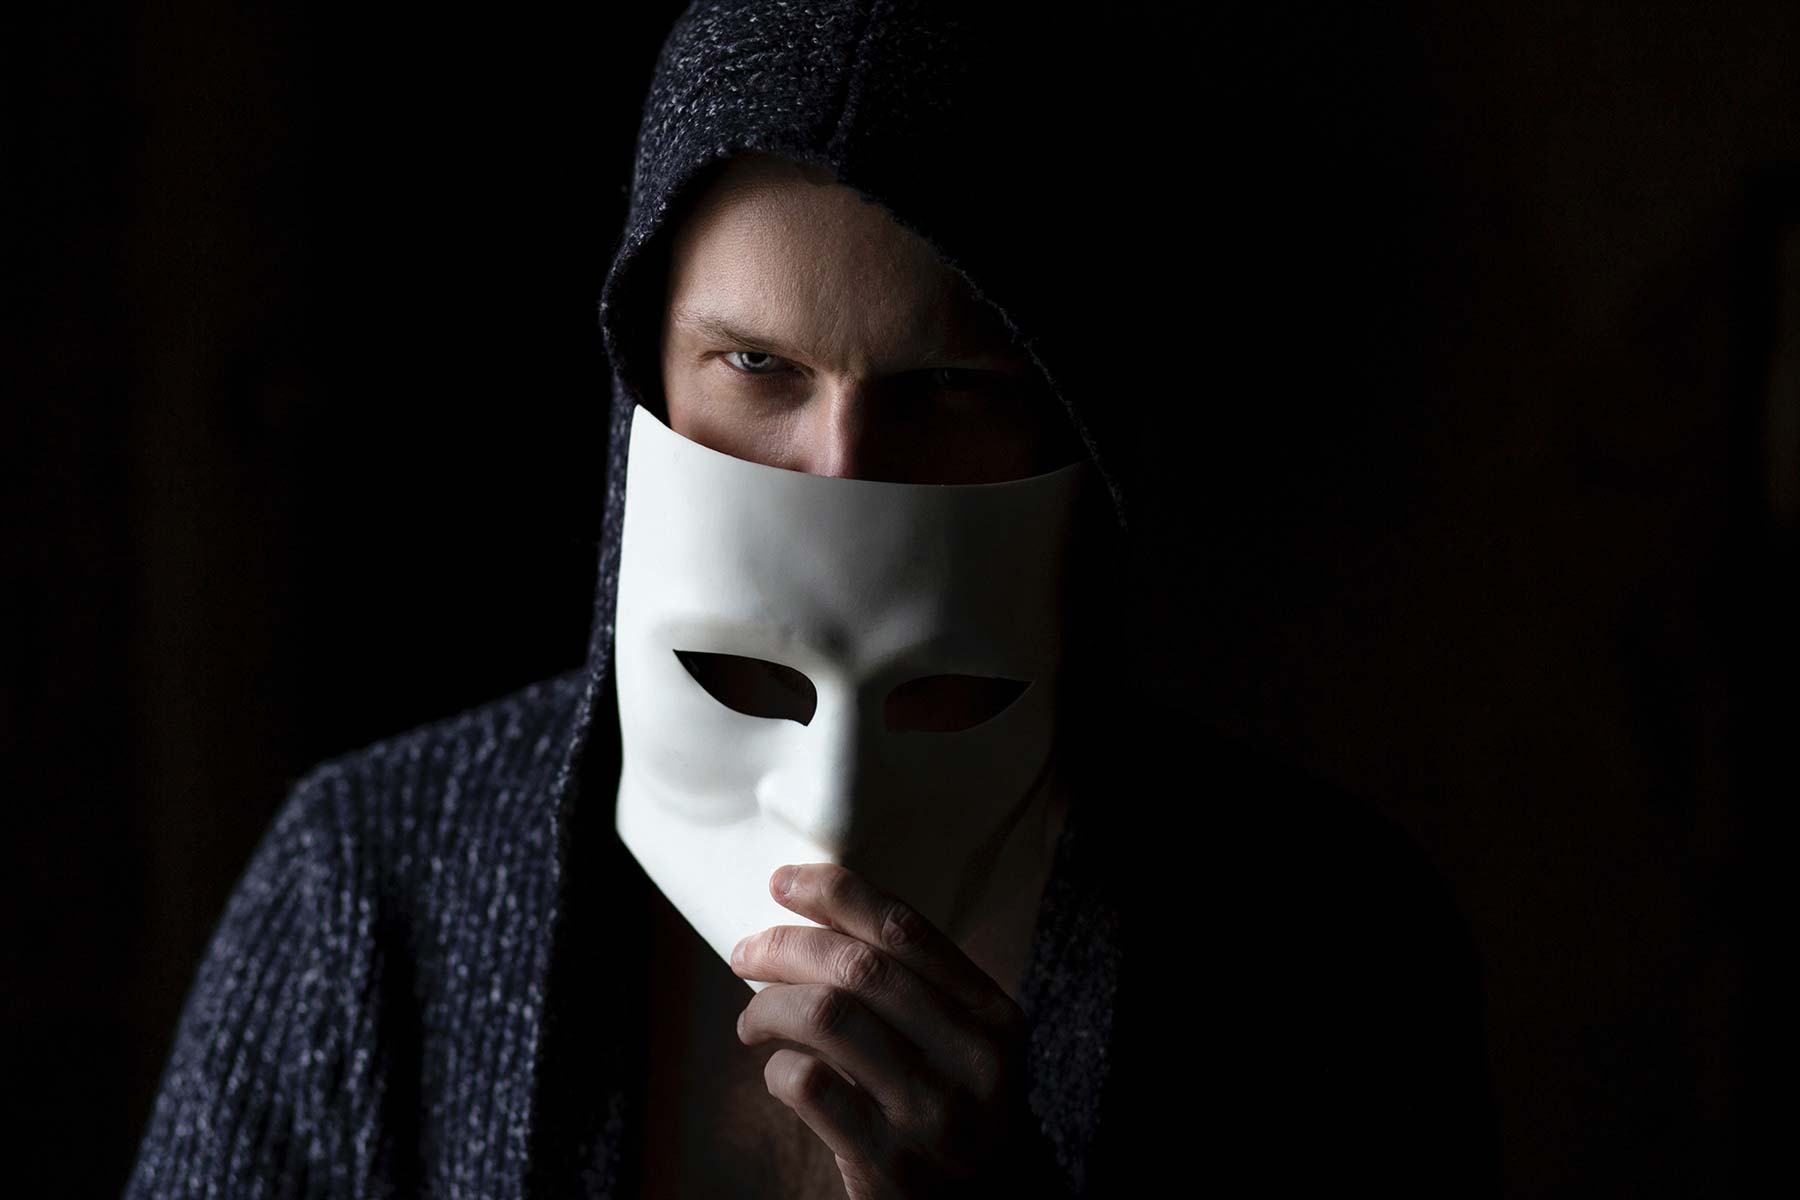 A scammer wearing a hood and mask